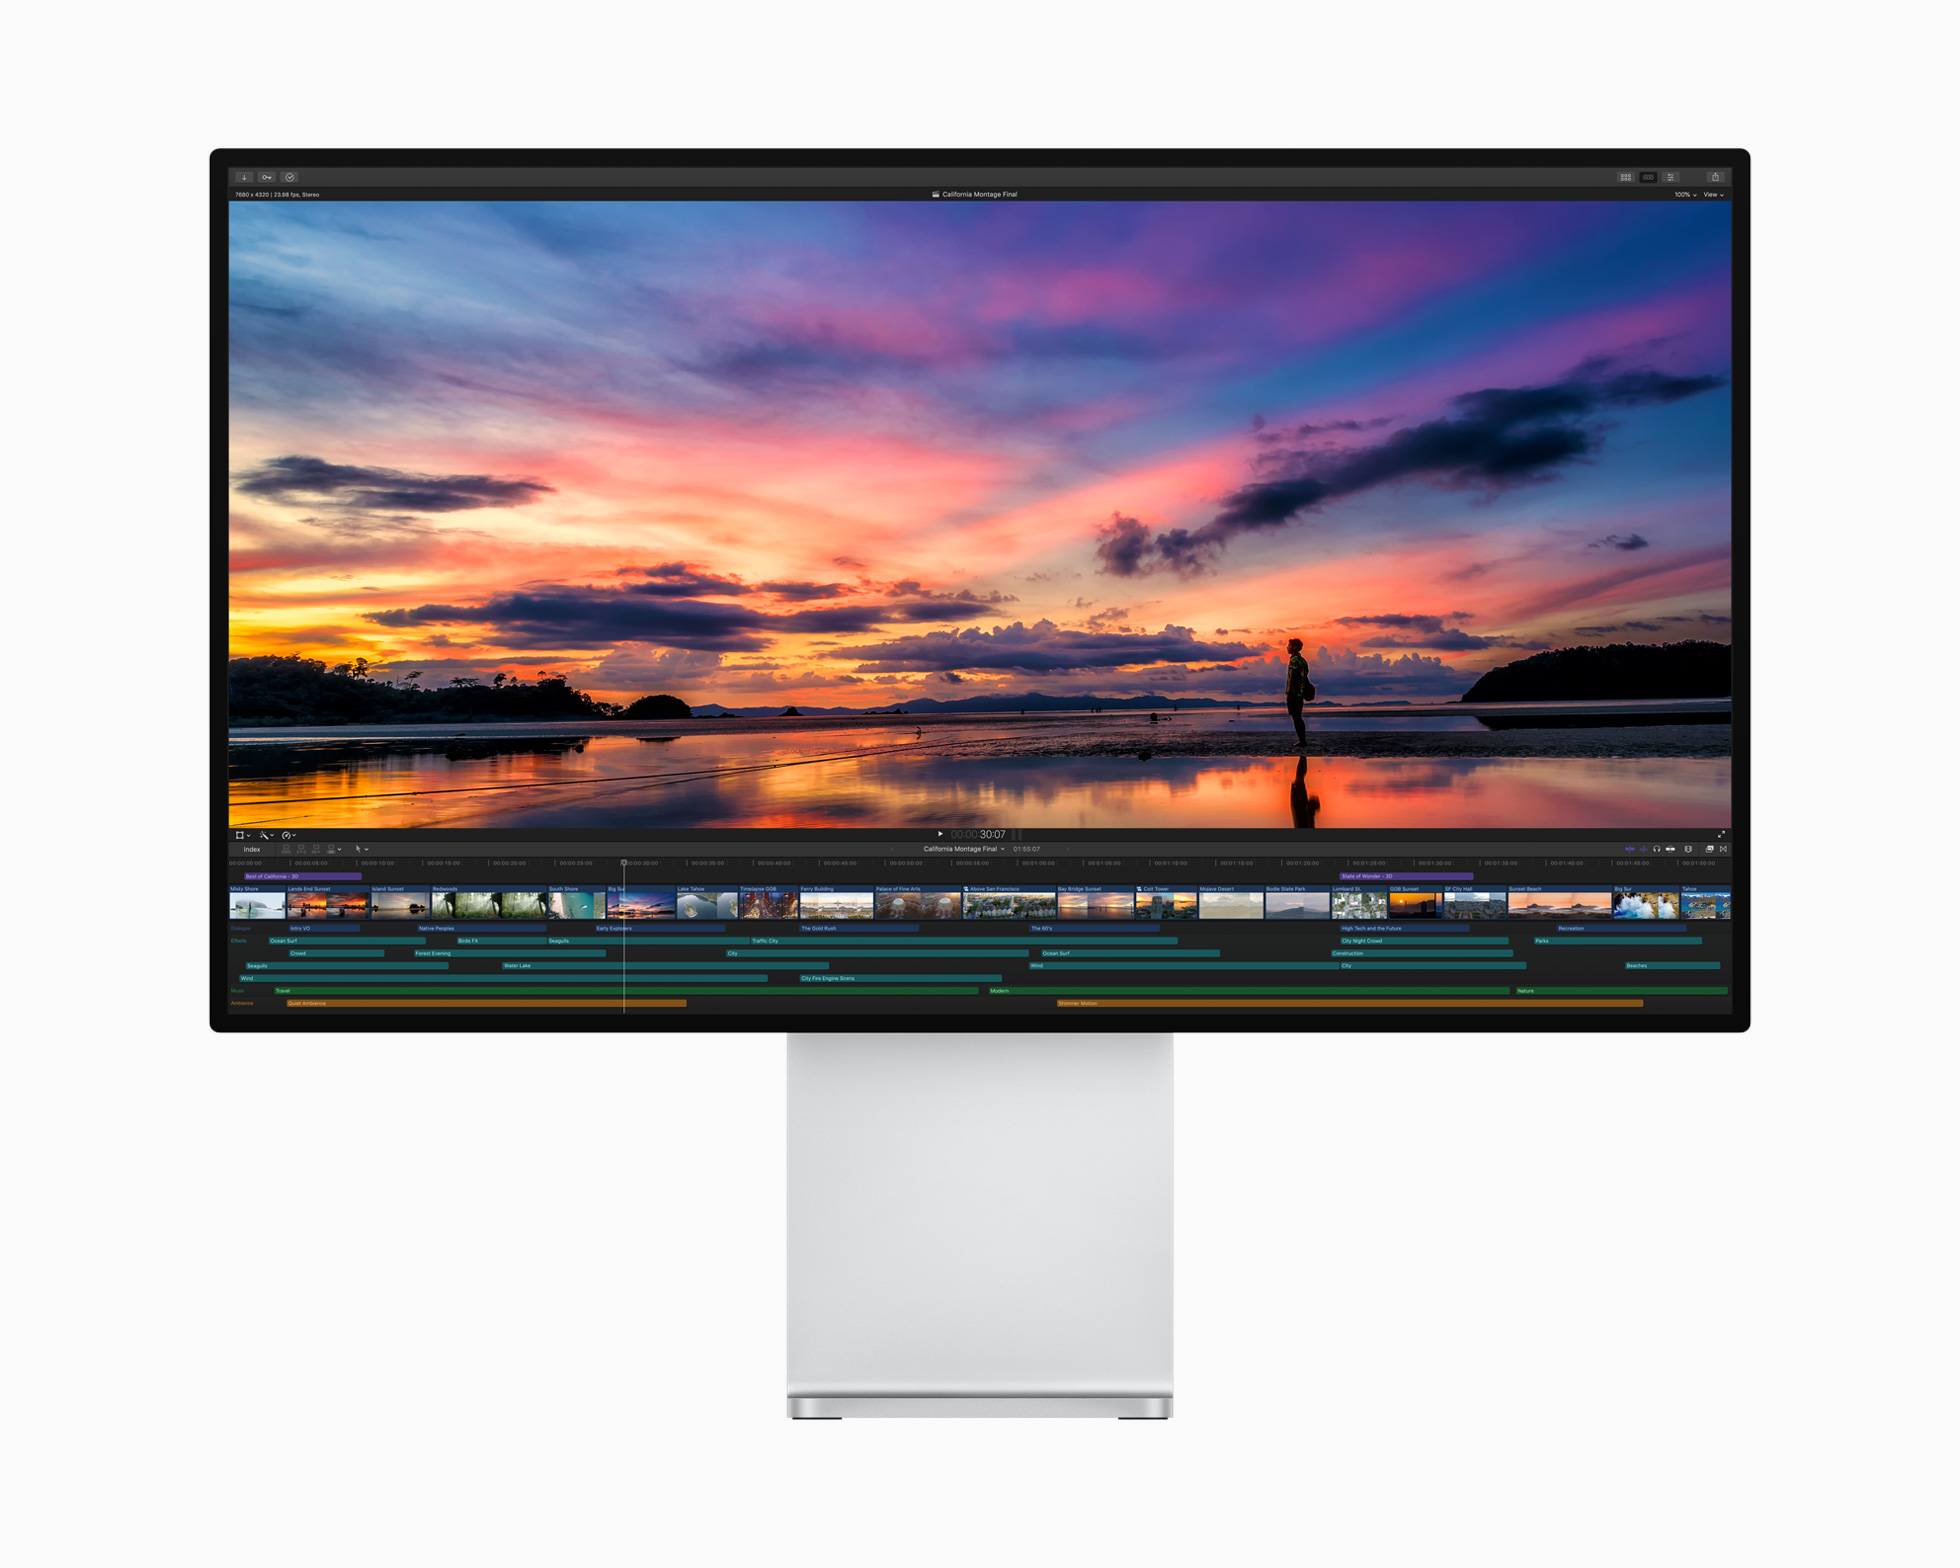 minimum video card for editing 4k video in final cut pro x with mac pro 2,1